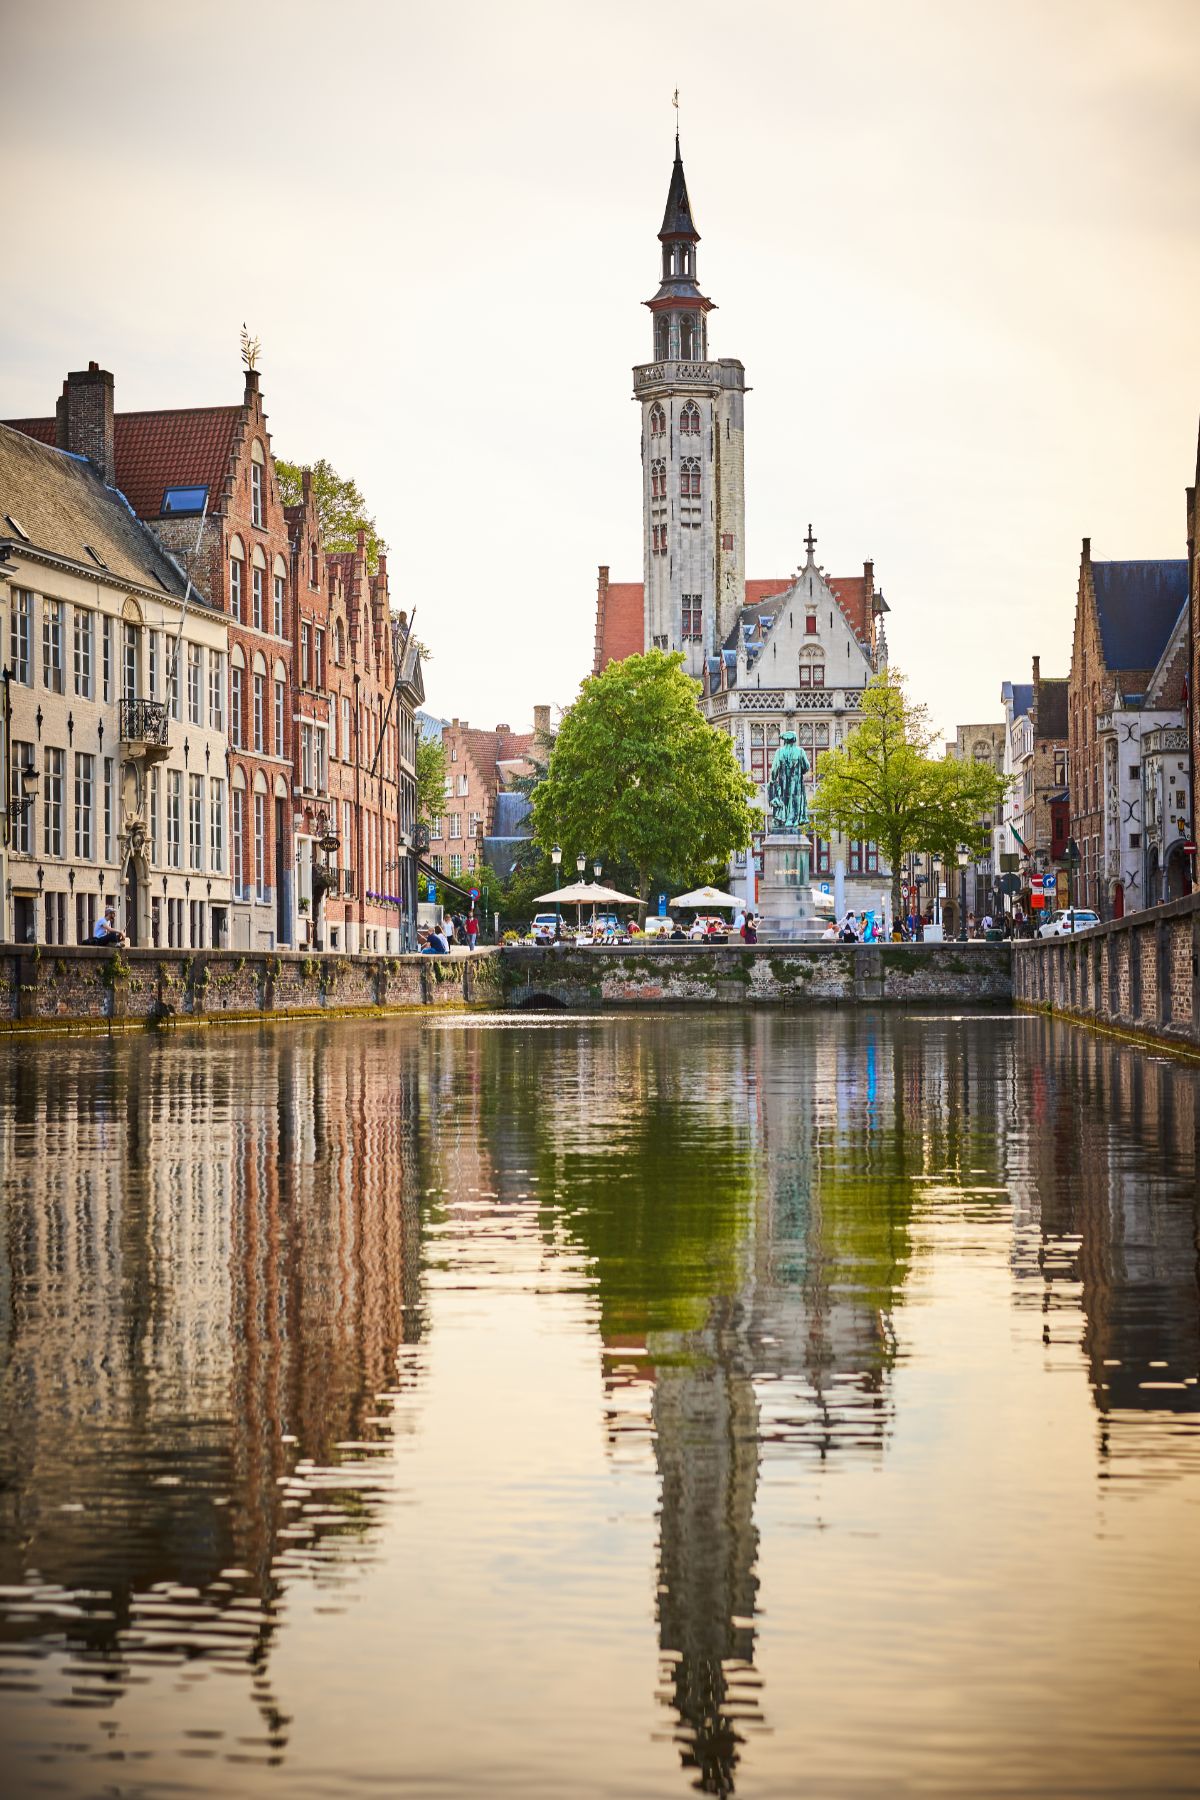 Jan van Eyck statue and historic buildings at the end of a canal in Bruges.